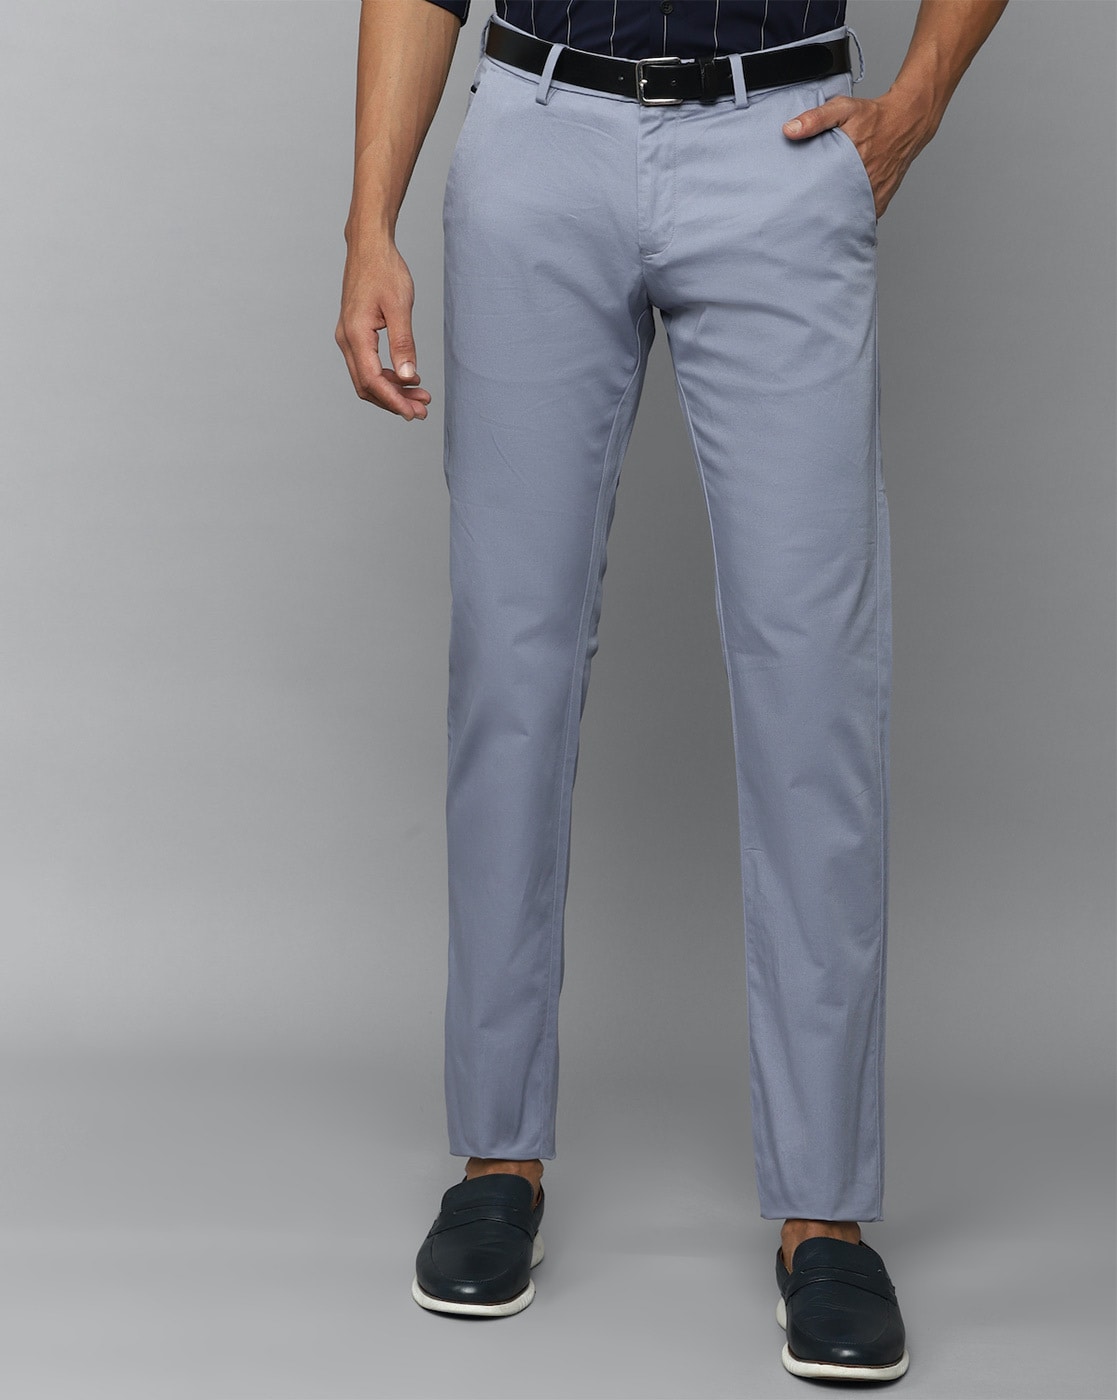 Allen Solly Trousers  Buy Allen Solly Boys Brown Slim Fit Solid Trousers  Online  Nykaa Fashion